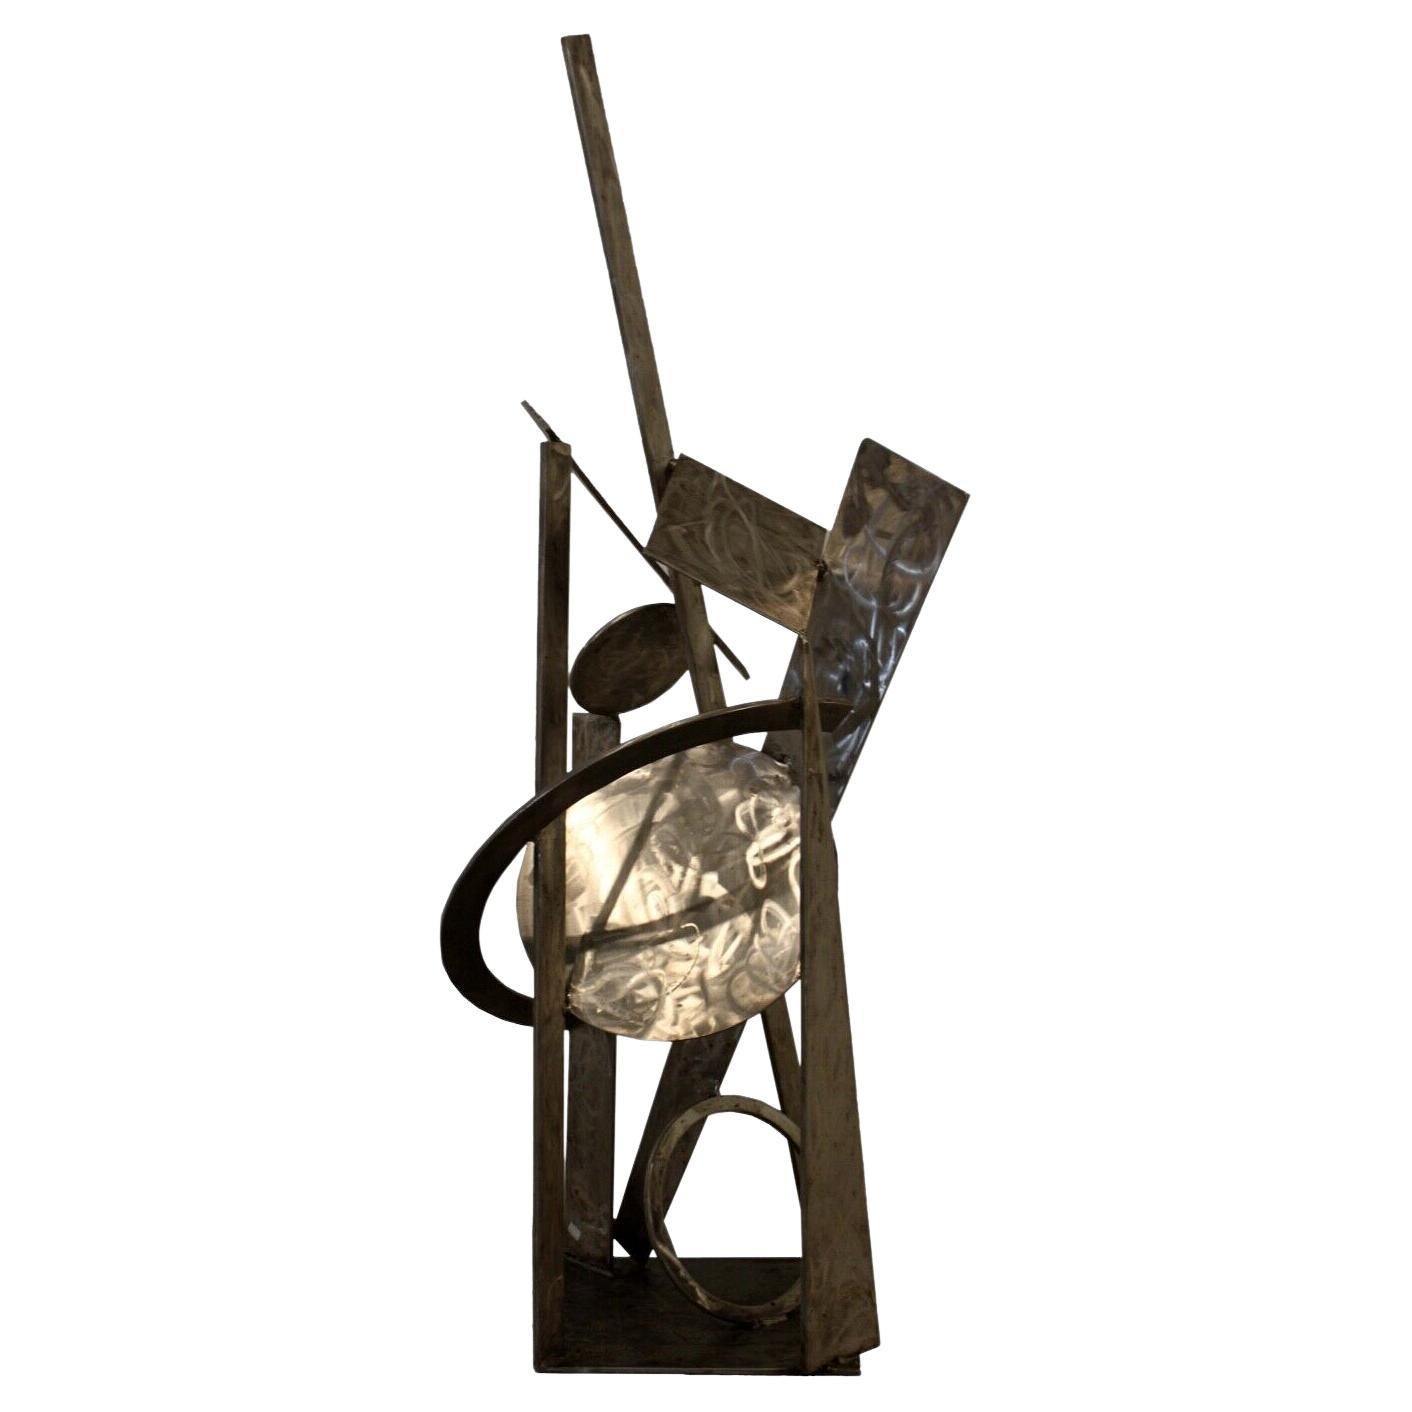 Contemporary Stainless Steel Abstract Sculpture by Robert Hansen For Sale